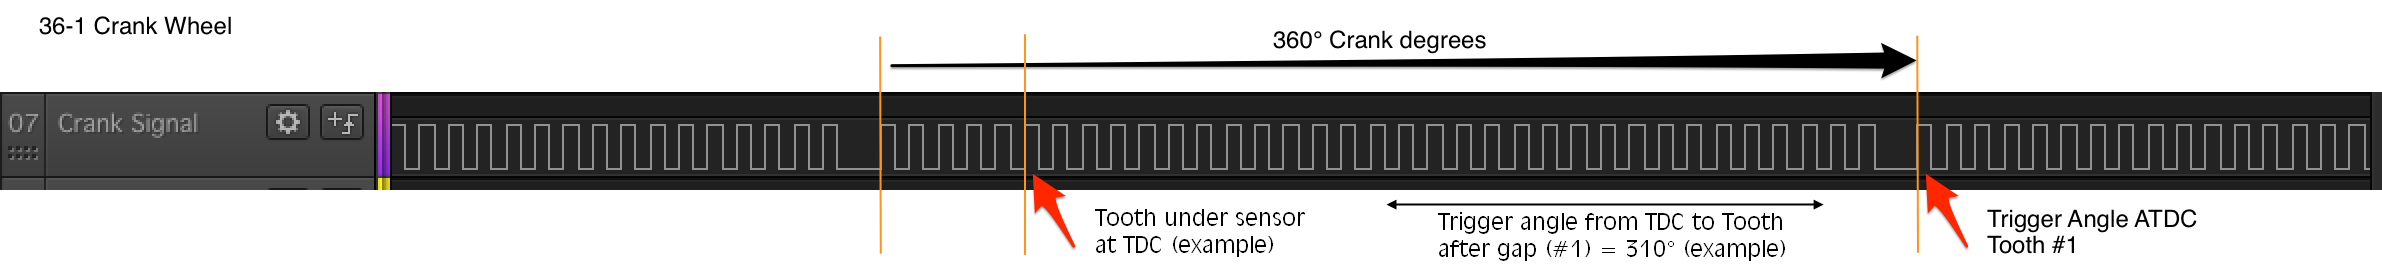 missingtooth_trace1.png